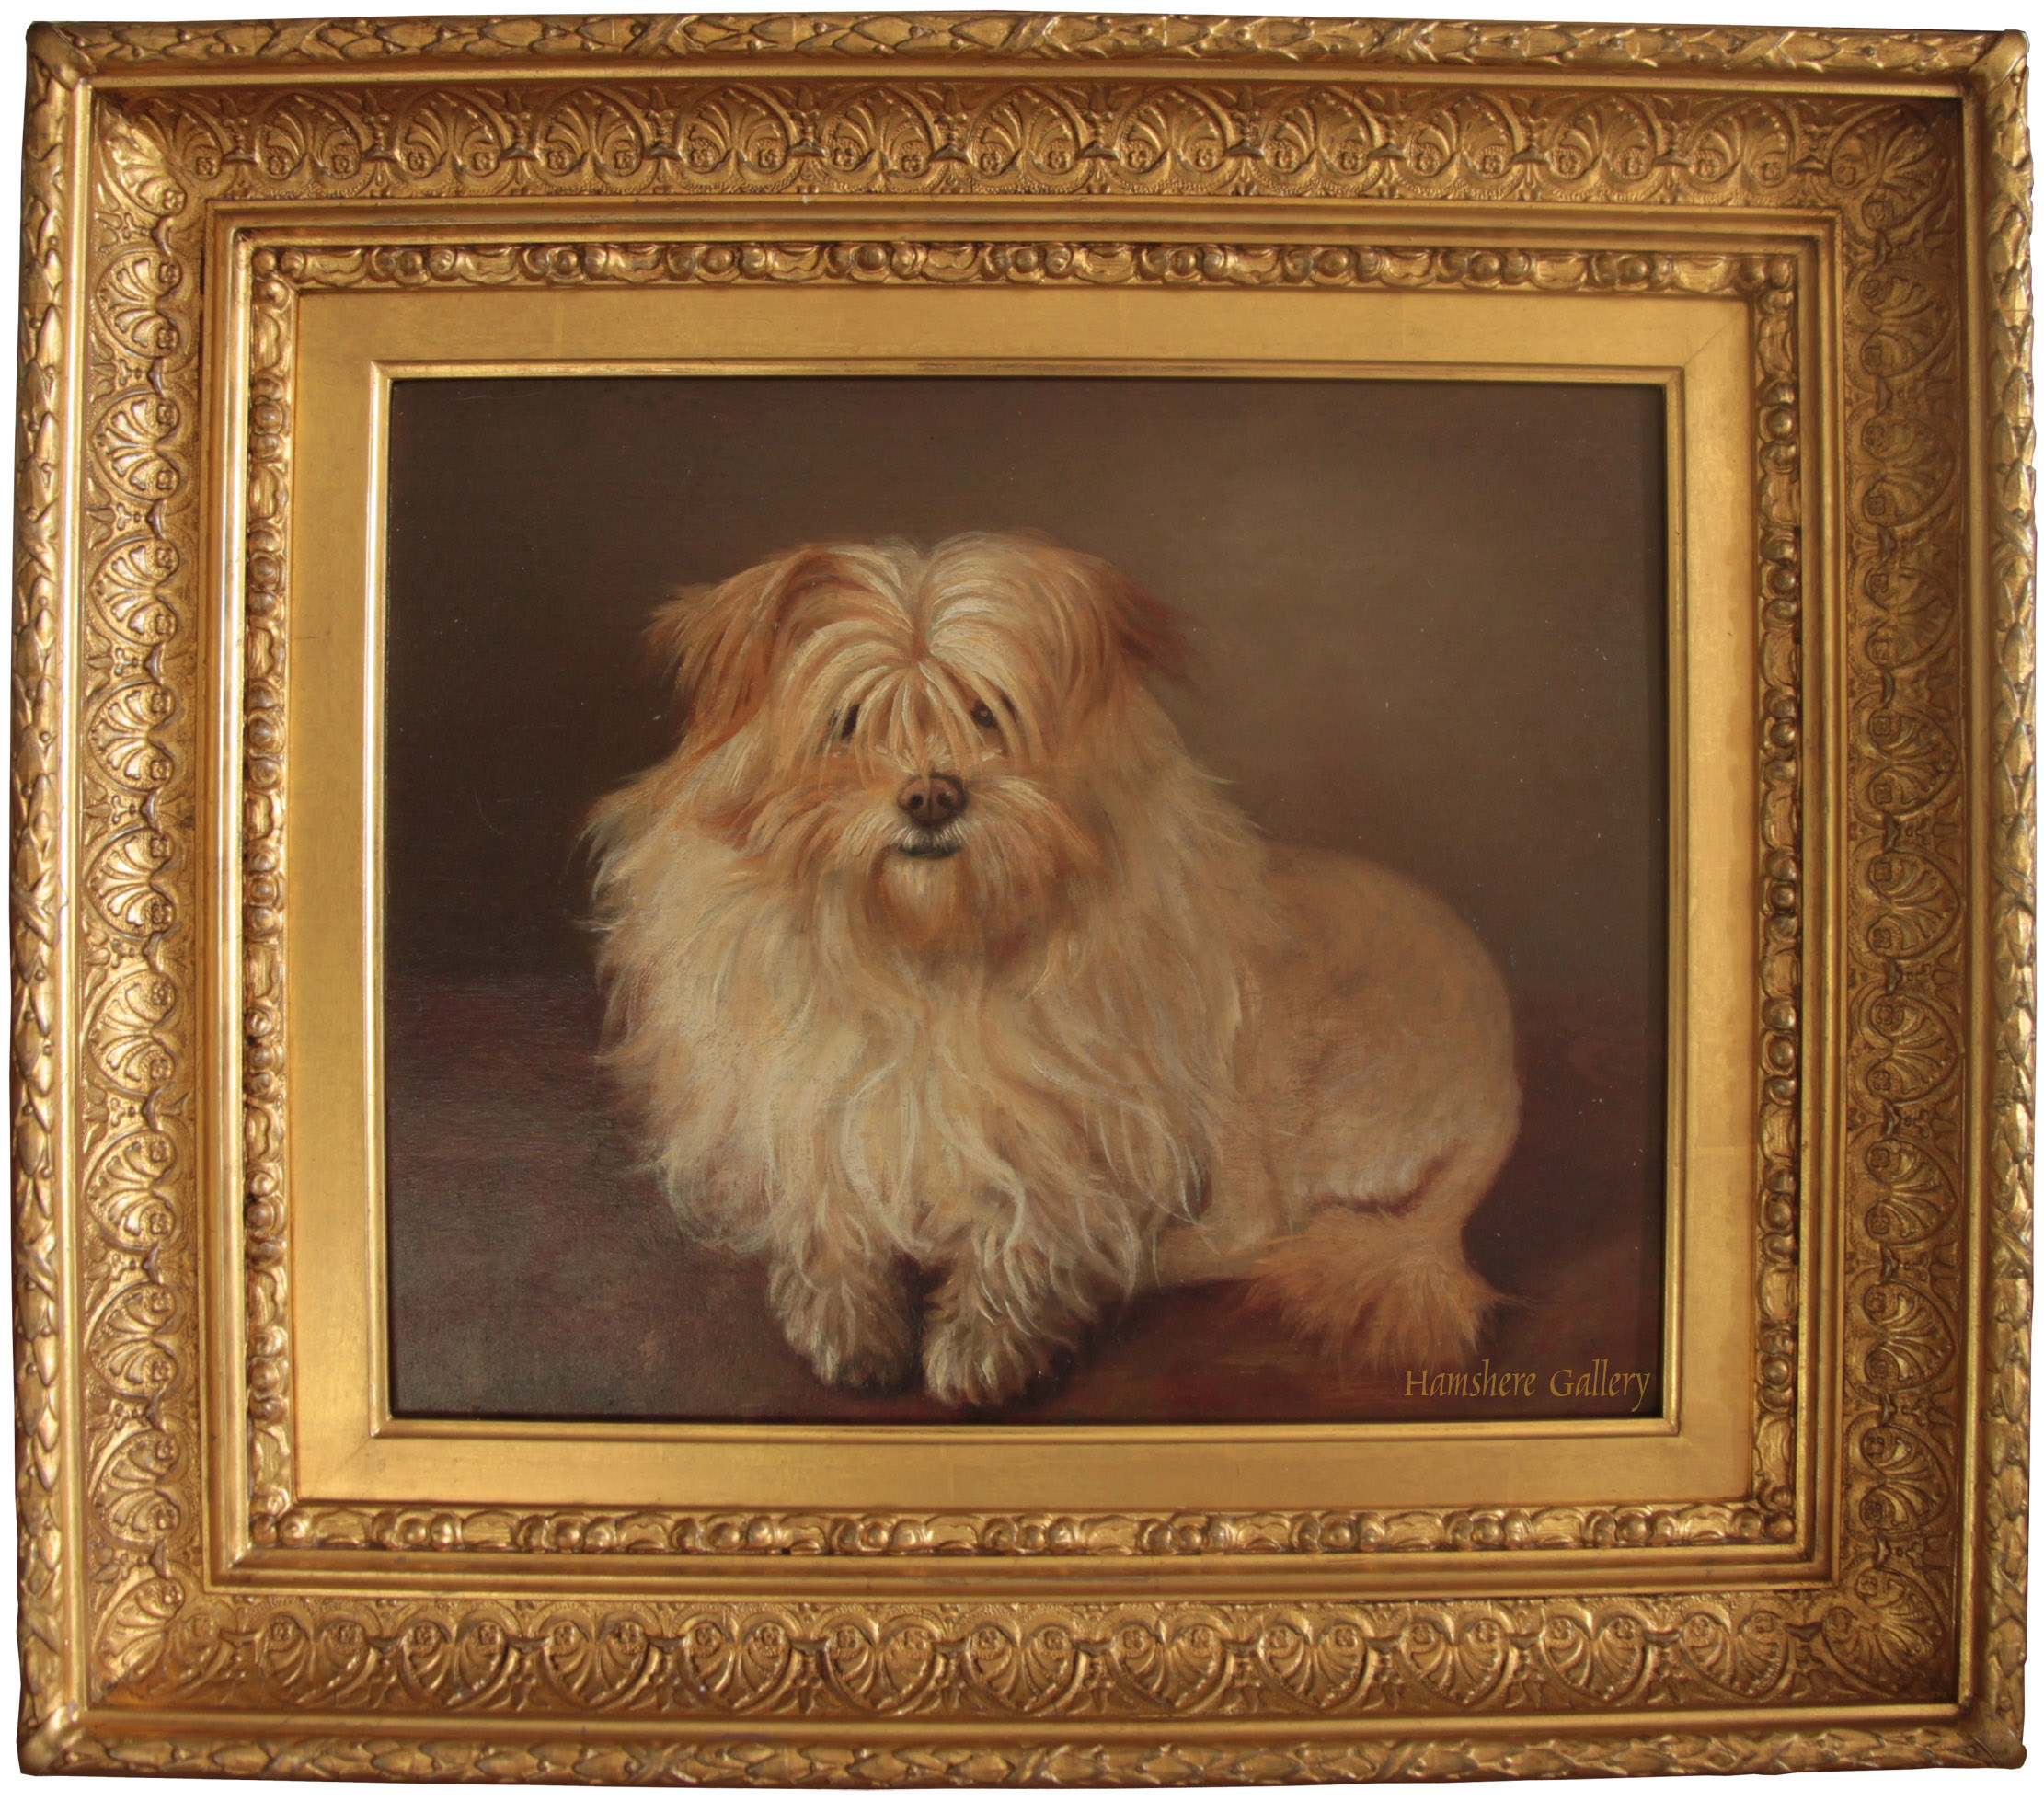 Click for larger image: Oil on panel of a Terrier by Hubert Henrard - Oil on panel of a Terrier by Hubert Henrard